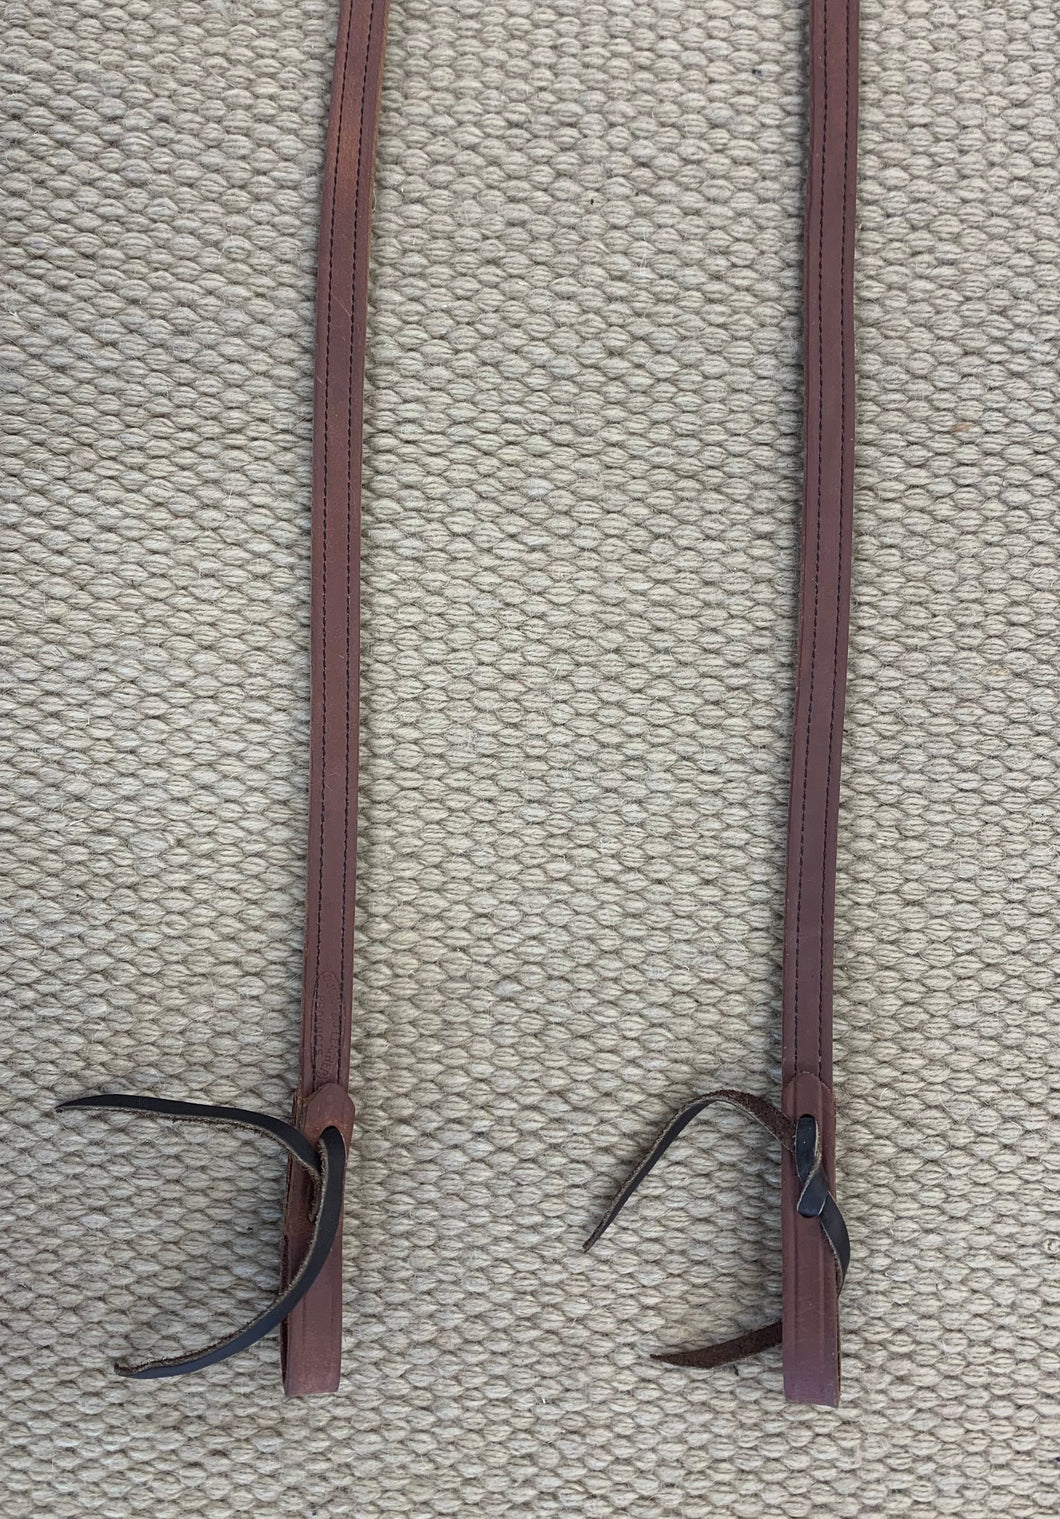 Closed Reins - CR14 - Double Sewn Harness extra long 10' single rein